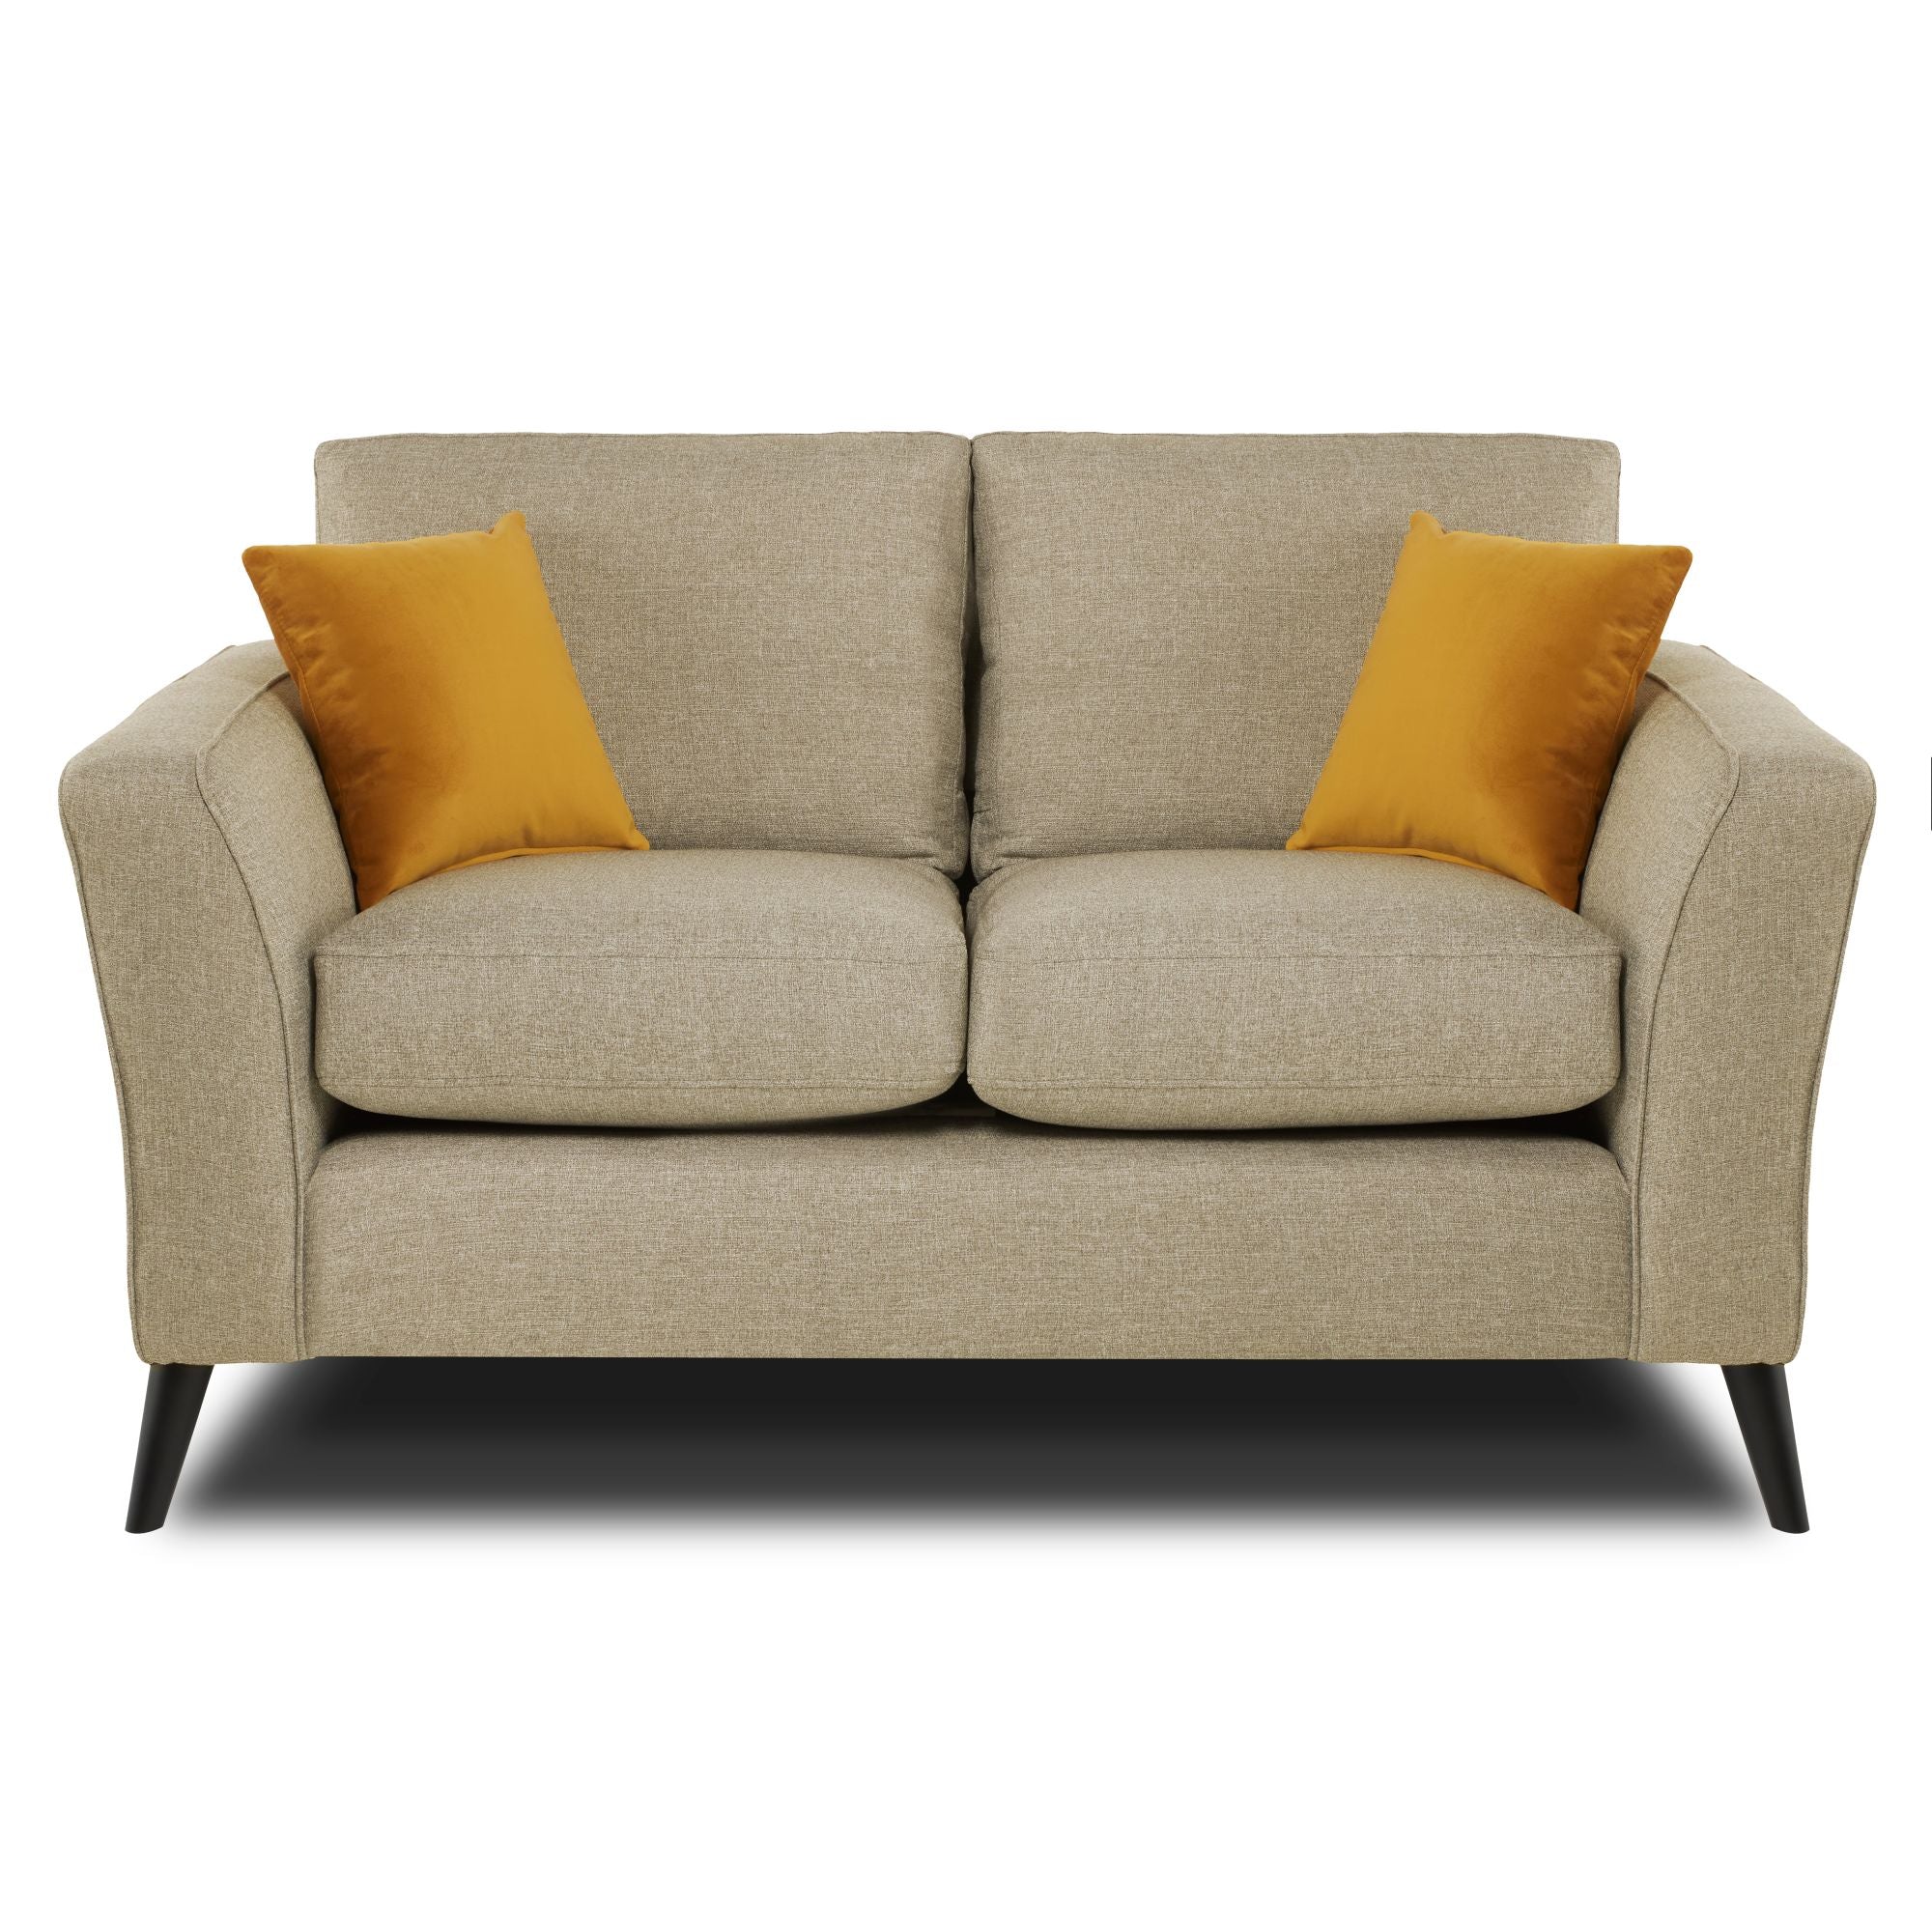 Libby 2 seater sofa in Oatmeal shown front facing on a white background 